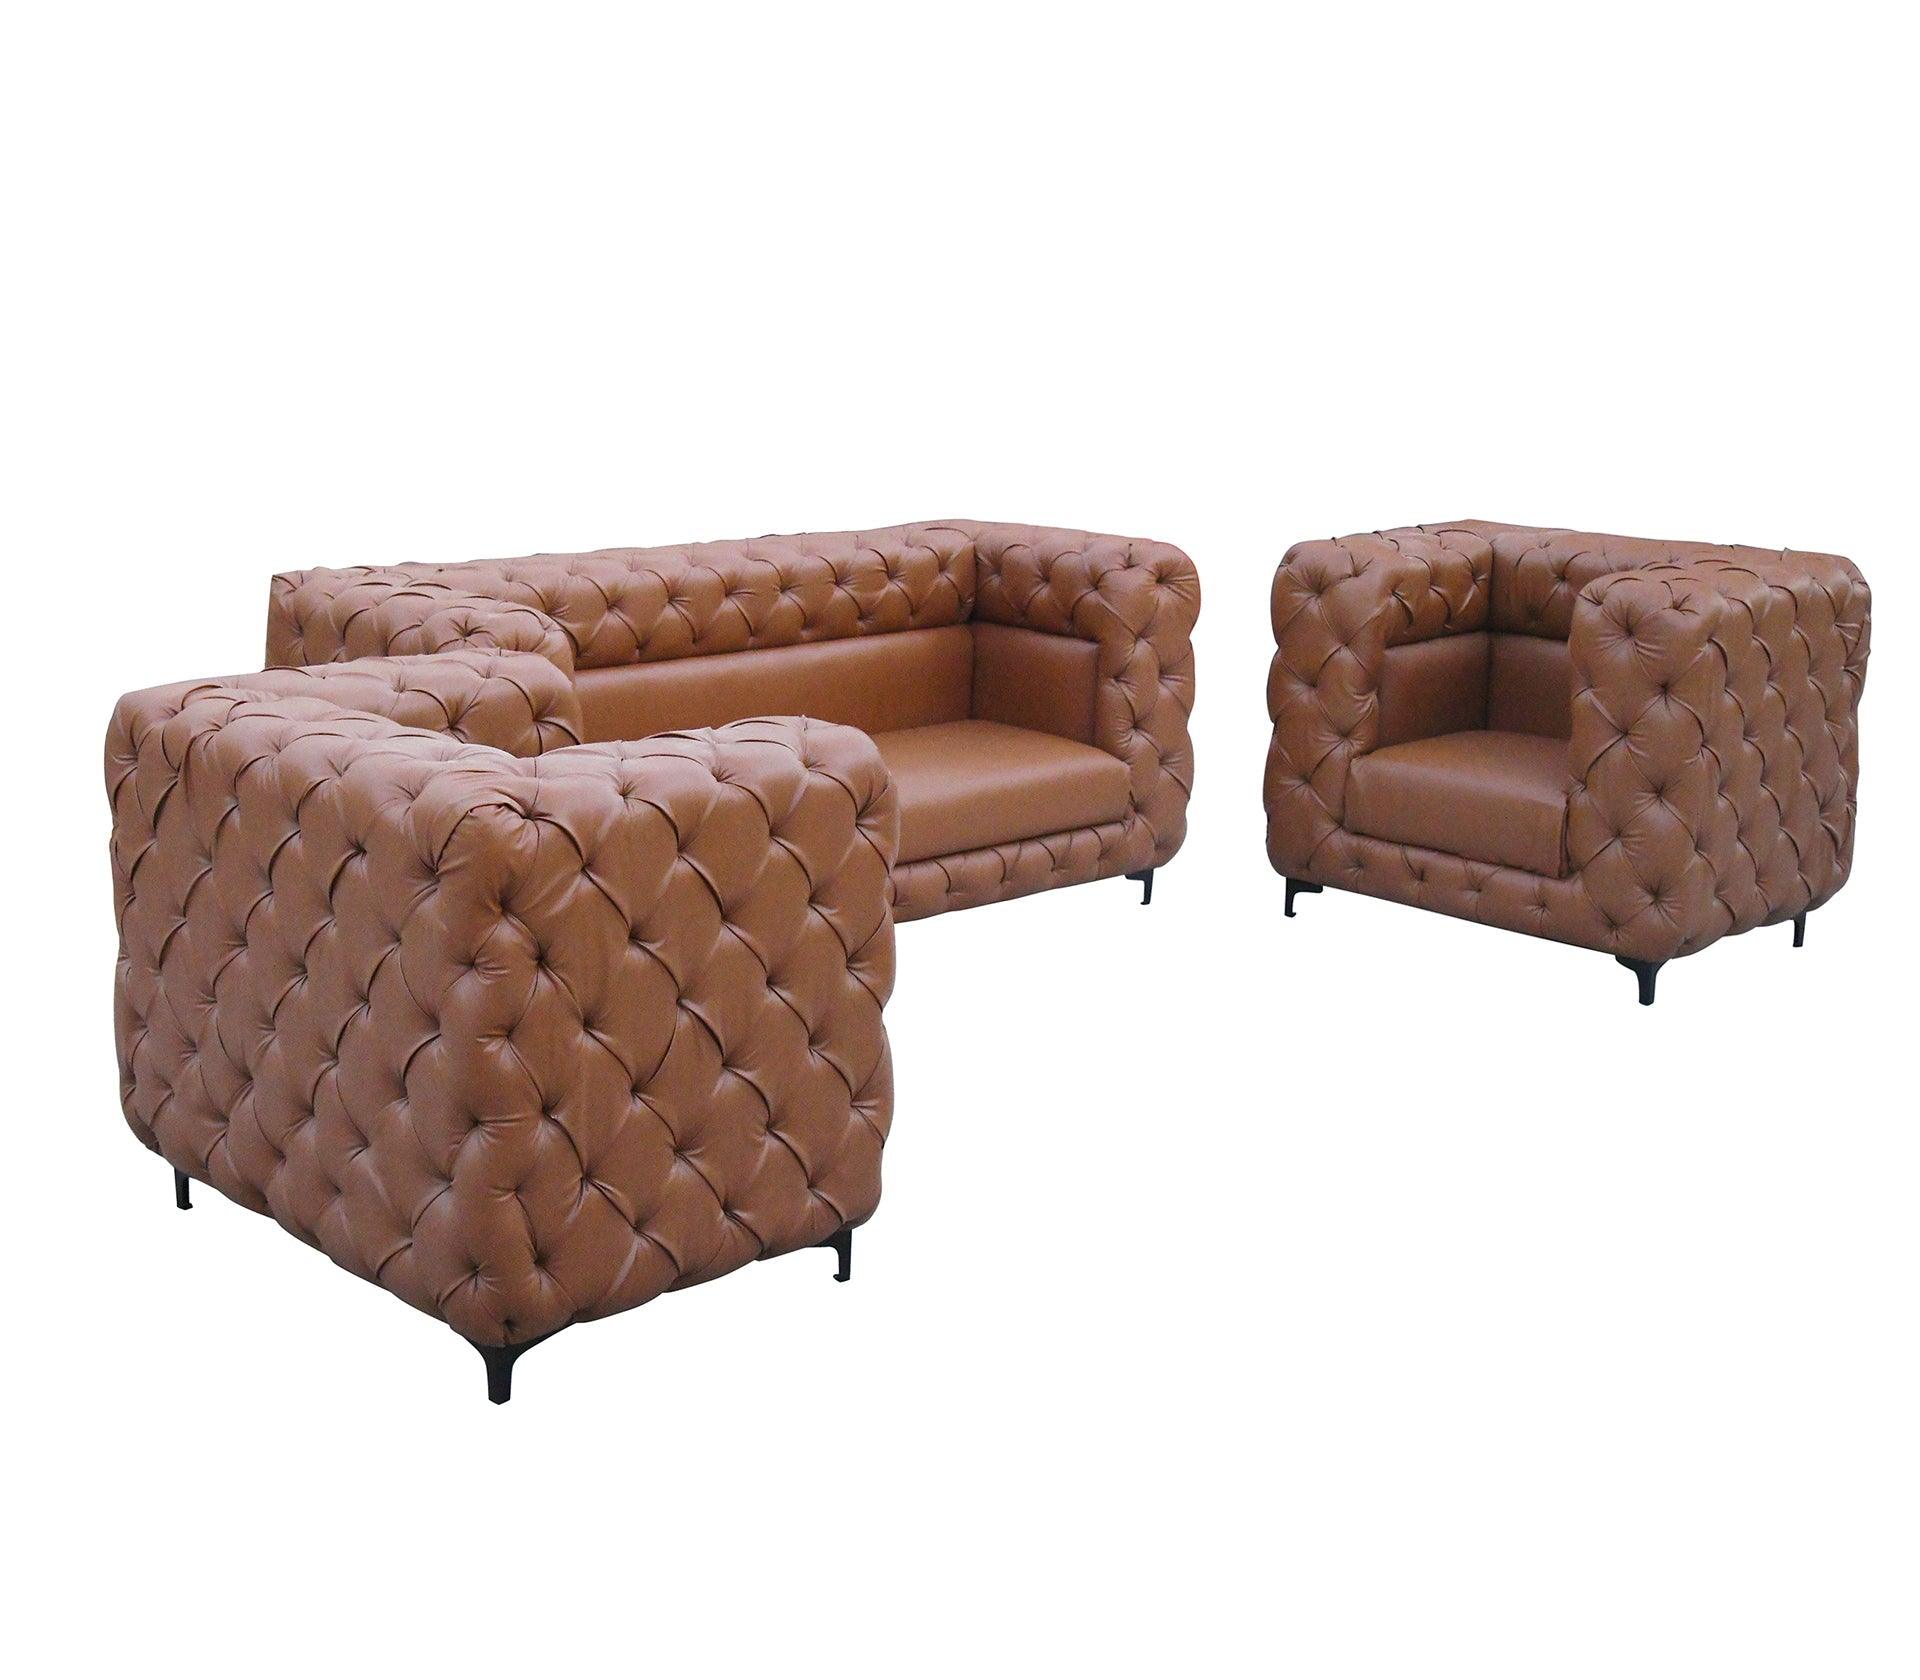 Brownie Candy Sofa Set 3+1+1 With Golden Legs - Furniture Castle